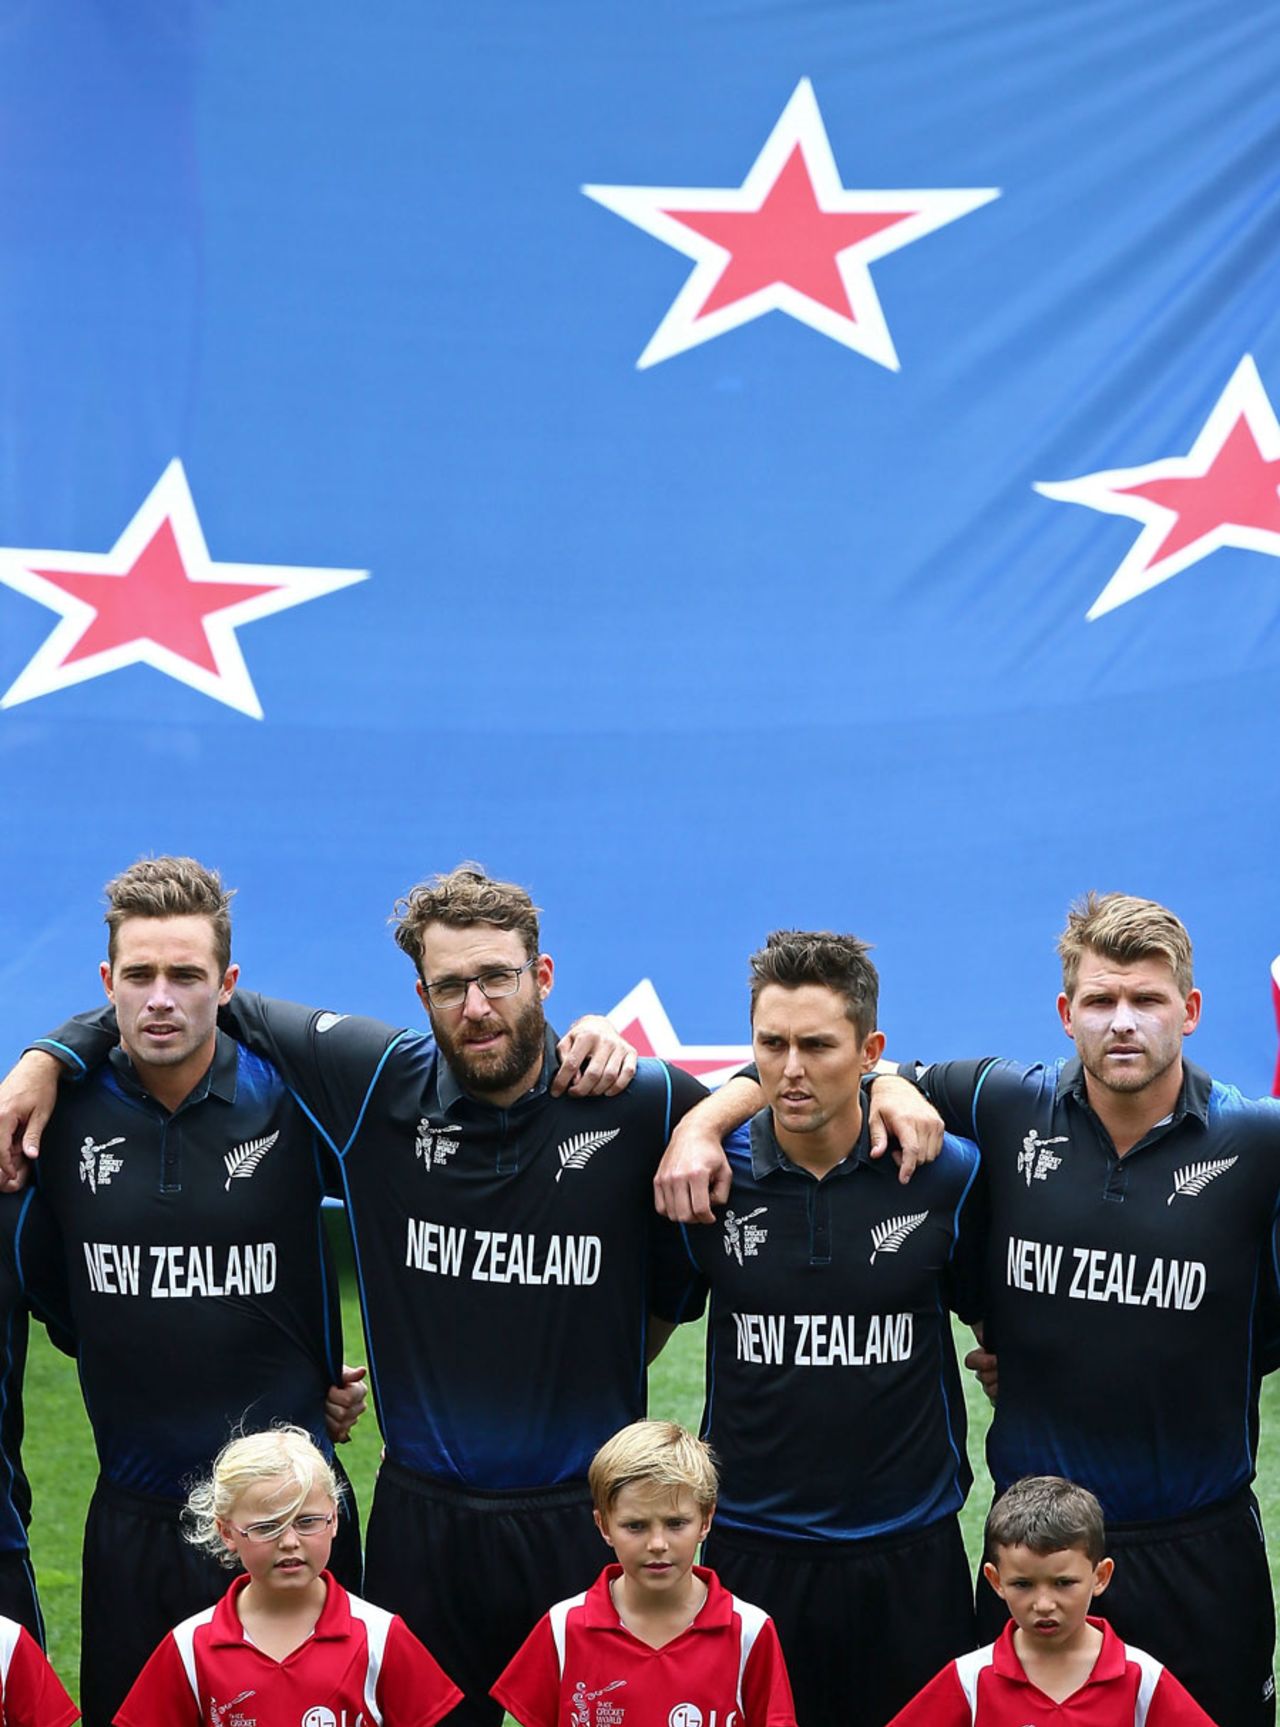 Tim Southee, Daniel Vettori, Trent Boult and Corey Anderson before the start of the game, New Zealand v South Africa, World Cup 2015, 1st Semi-Final, Auckland, March 24, 2015